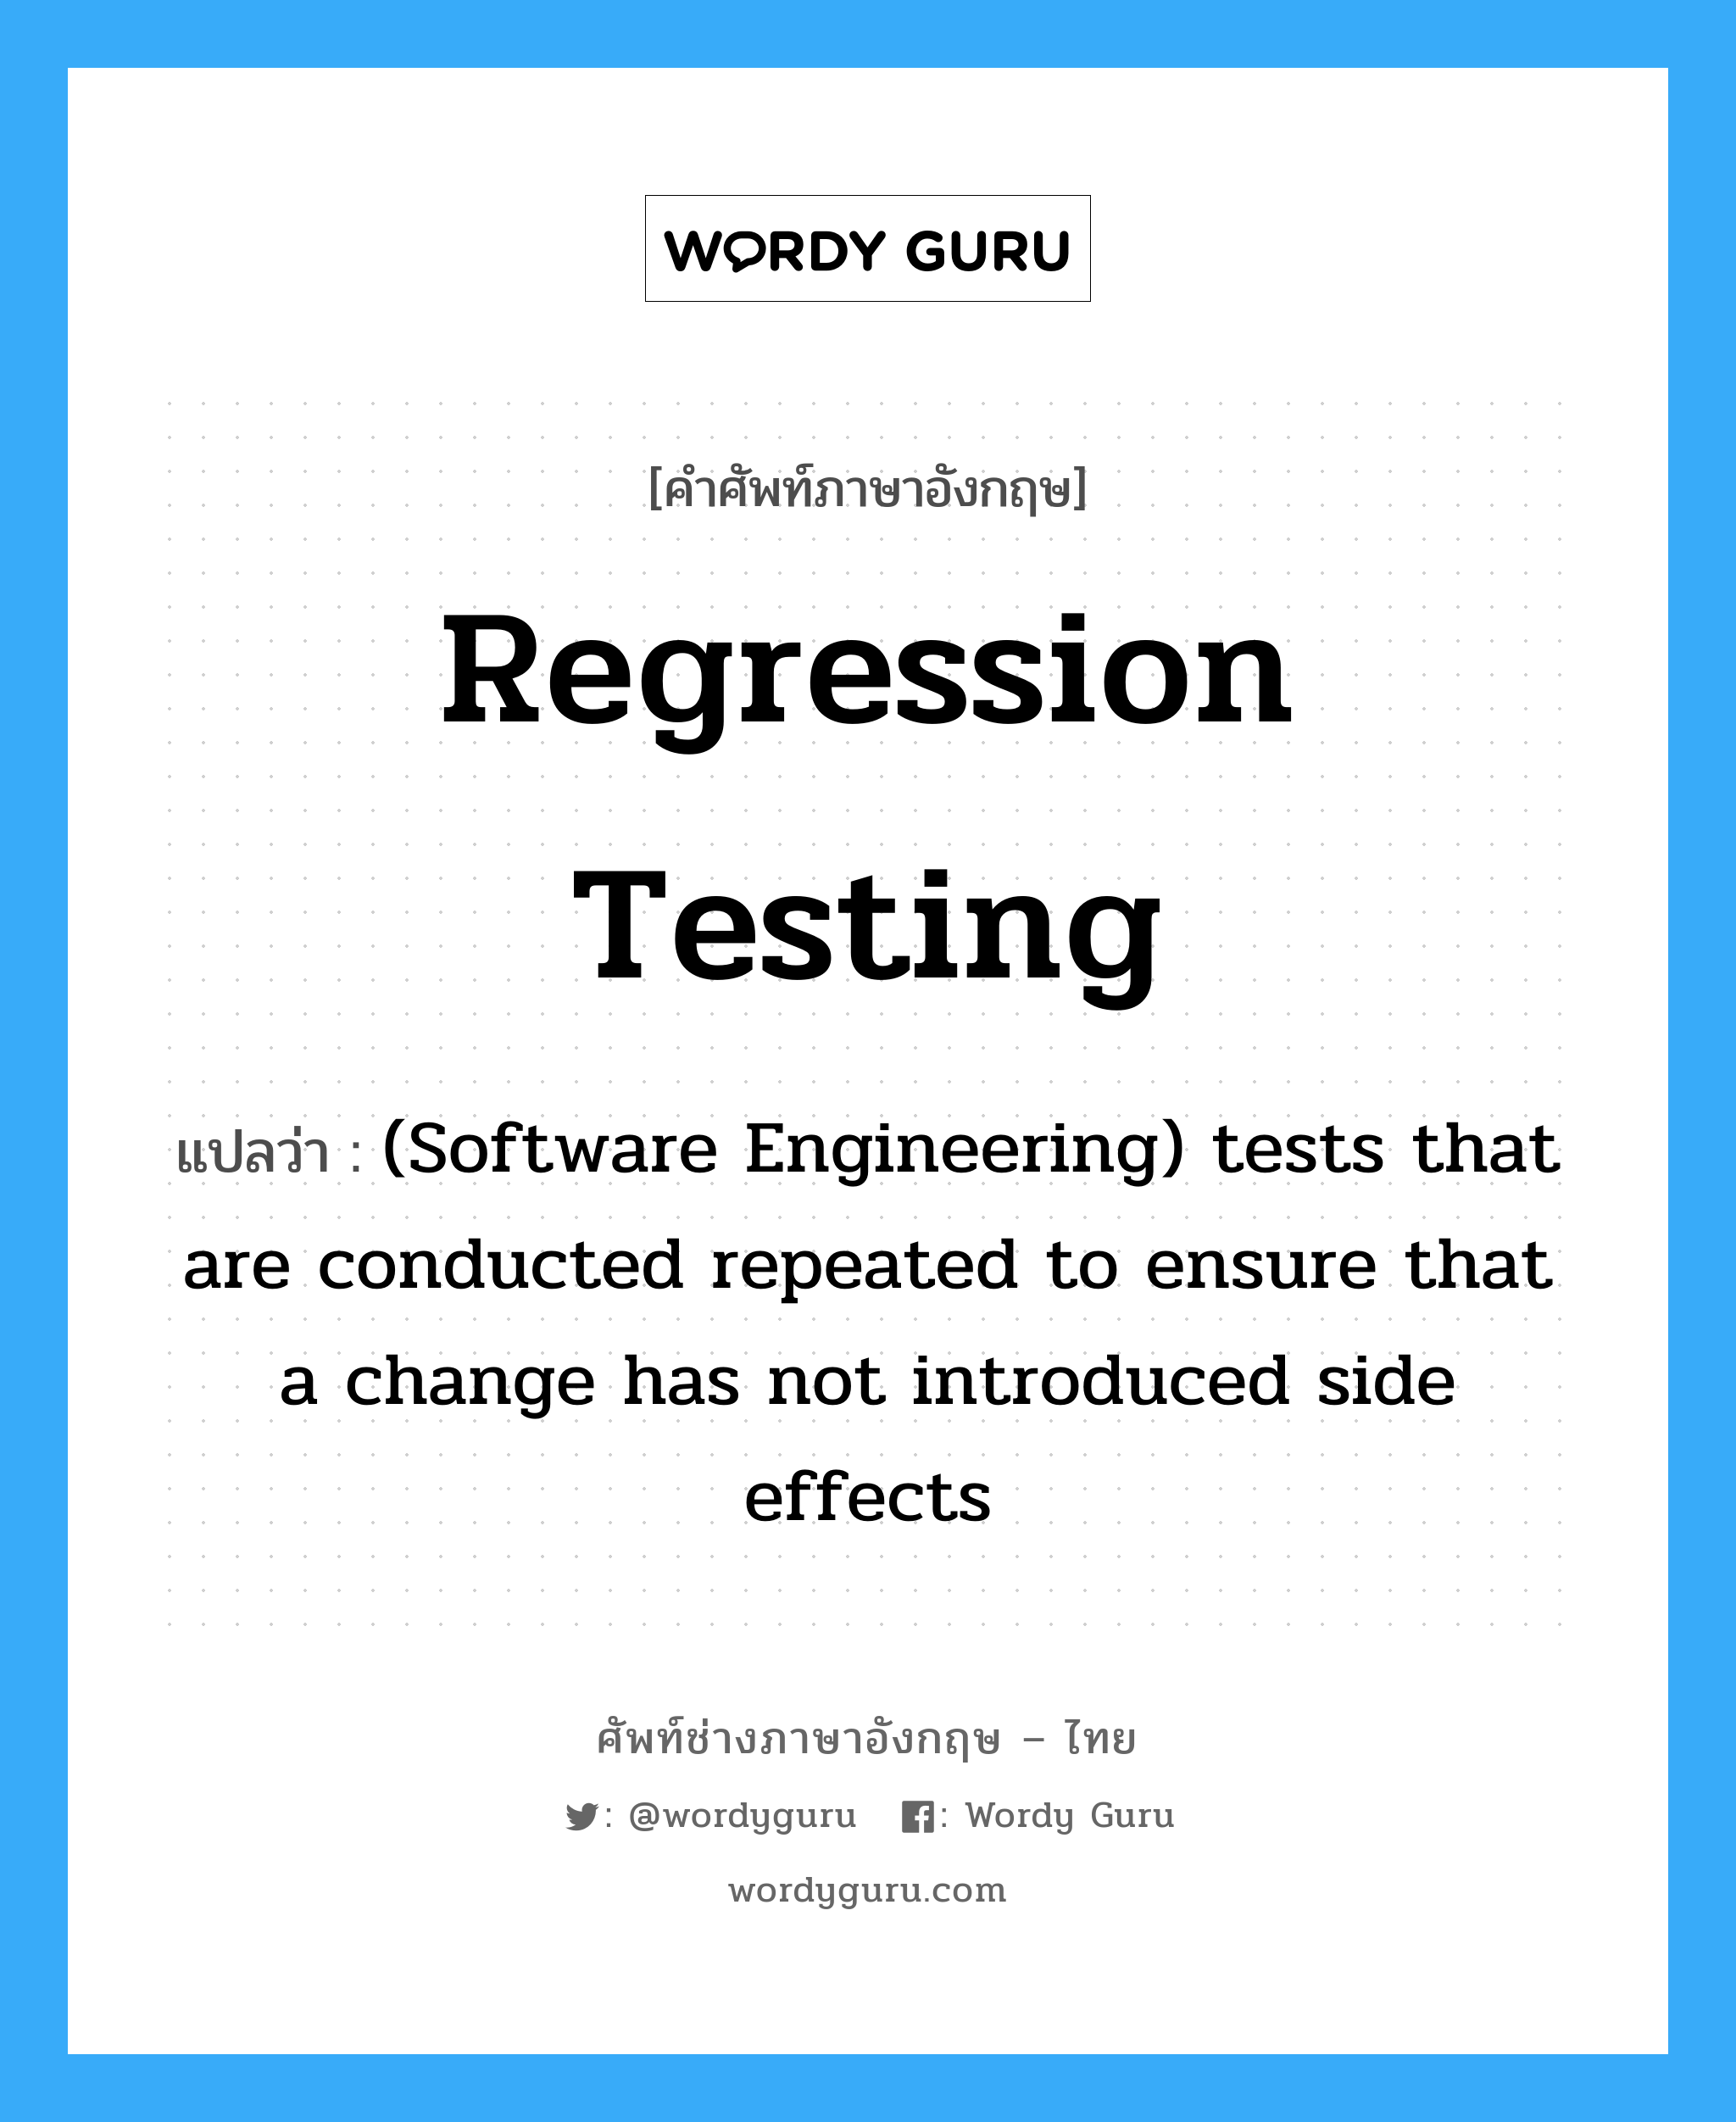 (Software Engineering) tests that are conducted repeated to ensure that a change has not introduced side effects ภาษาอังกฤษ?, คำศัพท์ช่างภาษาอังกฤษ - ไทย (Software Engineering) tests that are conducted repeated to ensure that a change has not introduced side effects คำศัพท์ภาษาอังกฤษ (Software Engineering) tests that are conducted repeated to ensure that a change has not introduced side effects แปลว่า Regression testing